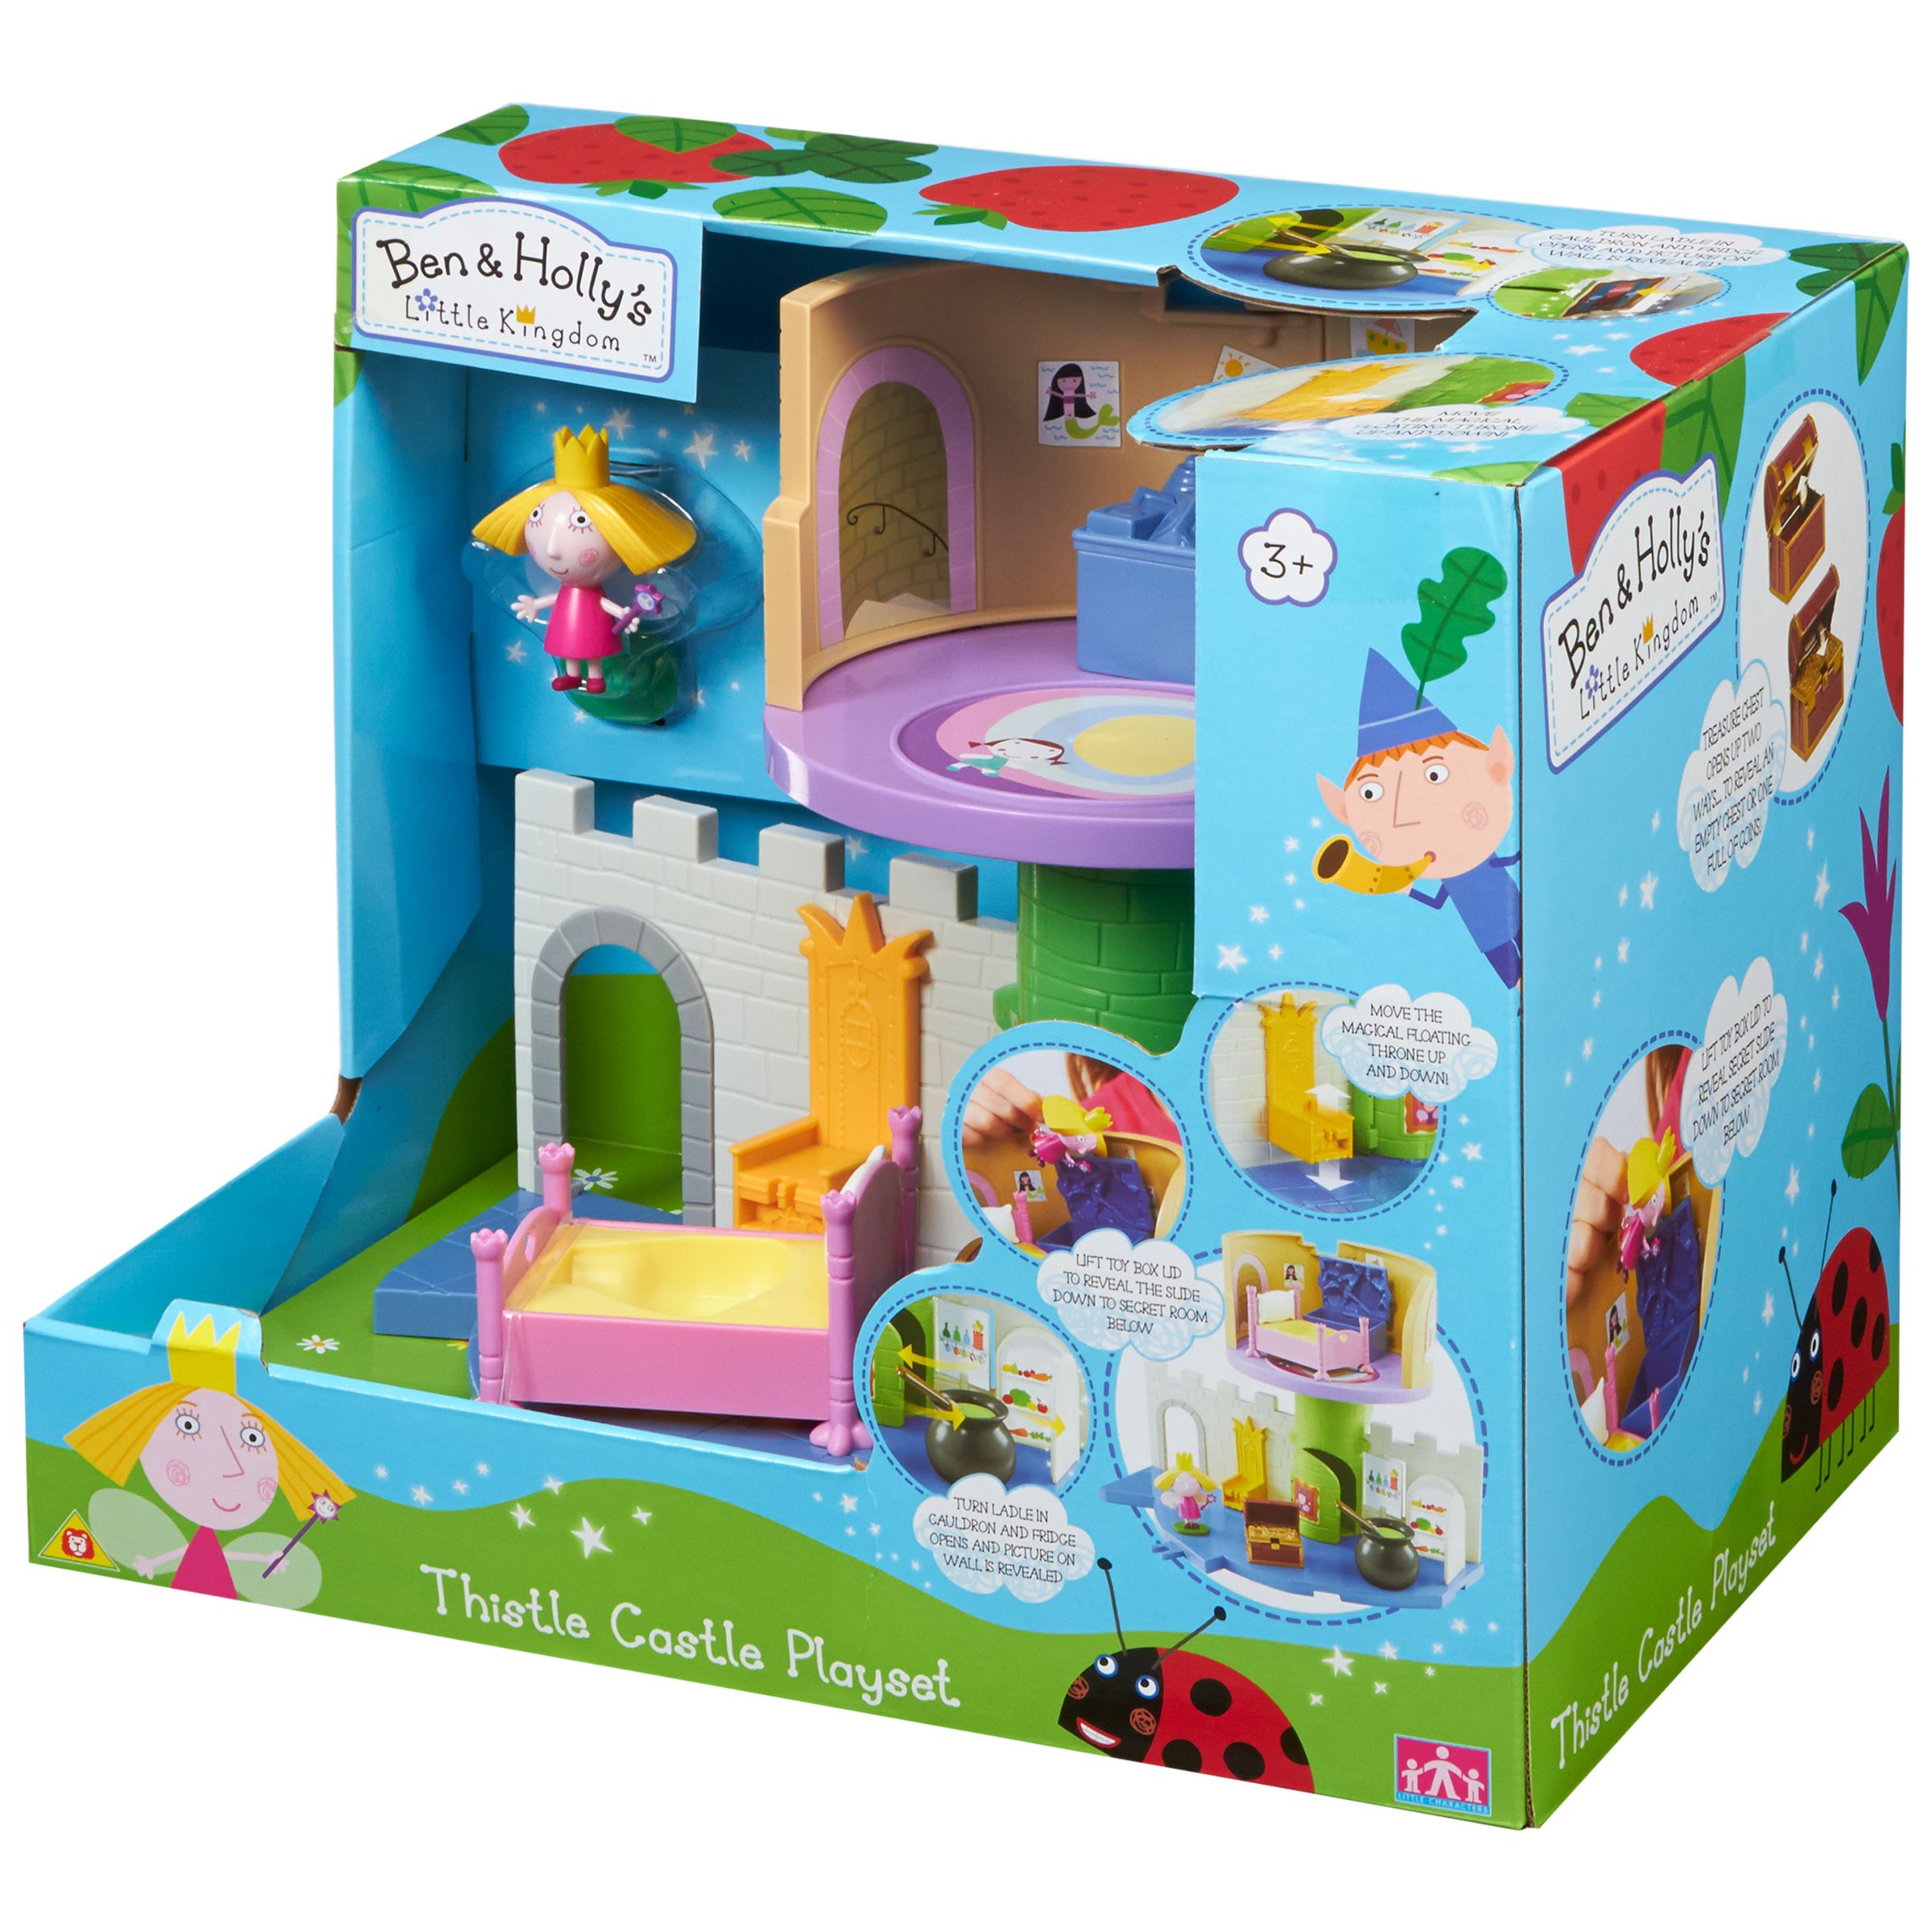 ben and holly thistle castle playset